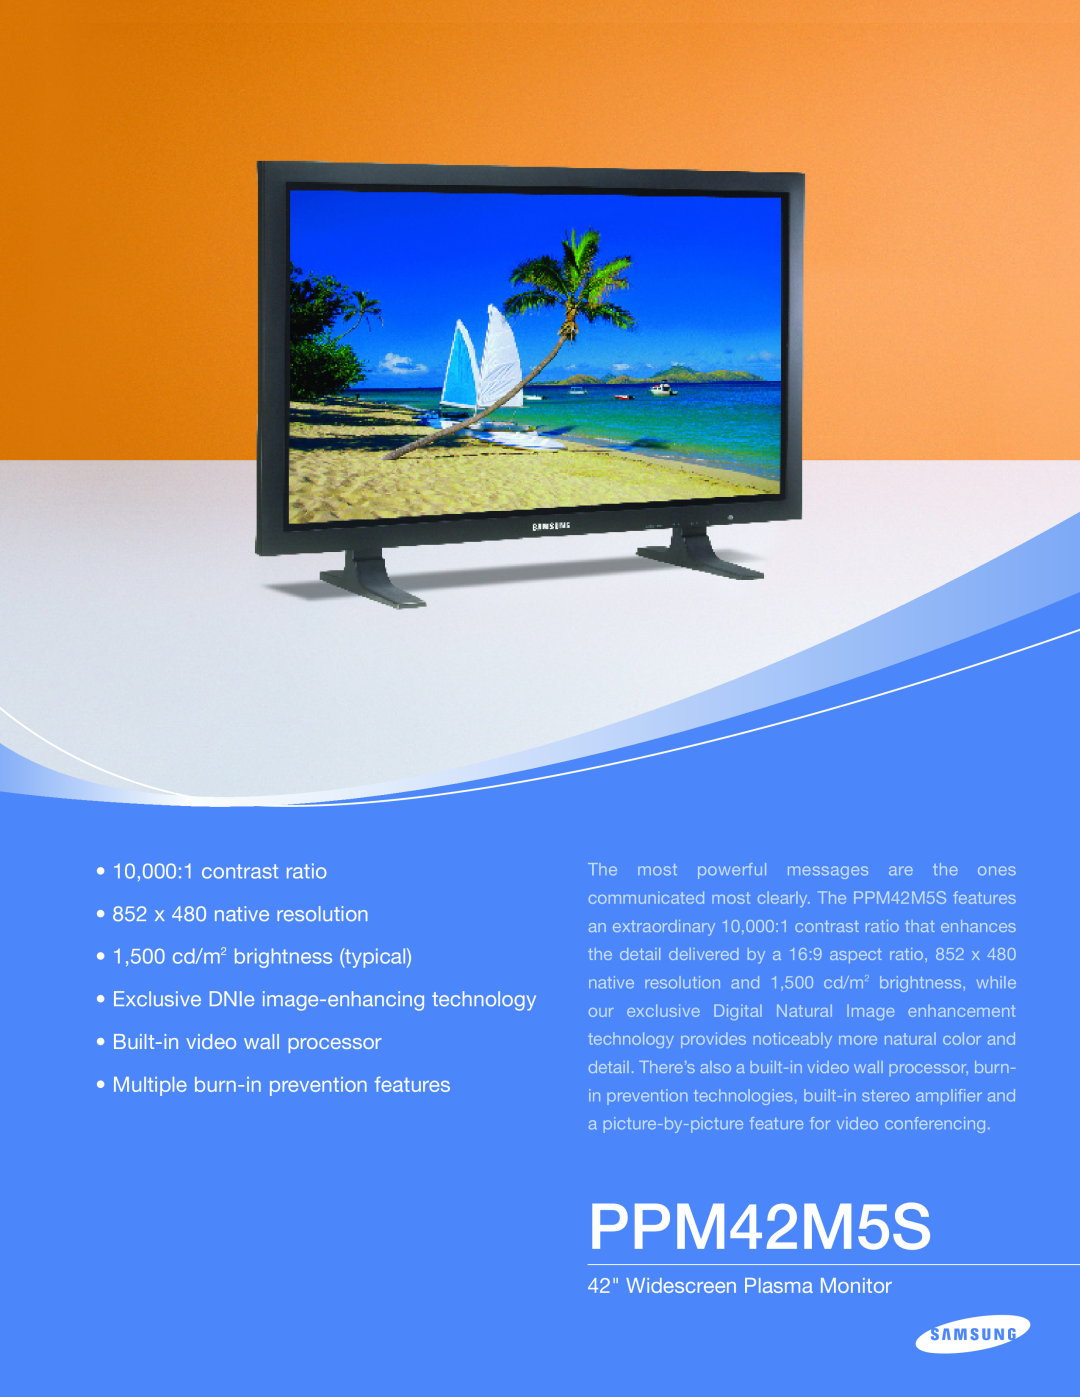 Samsung PPM42M5S manual 10,0001 contrast ratio 852 x 480 native resolution, 1,500 cd/m2 brightness typical 